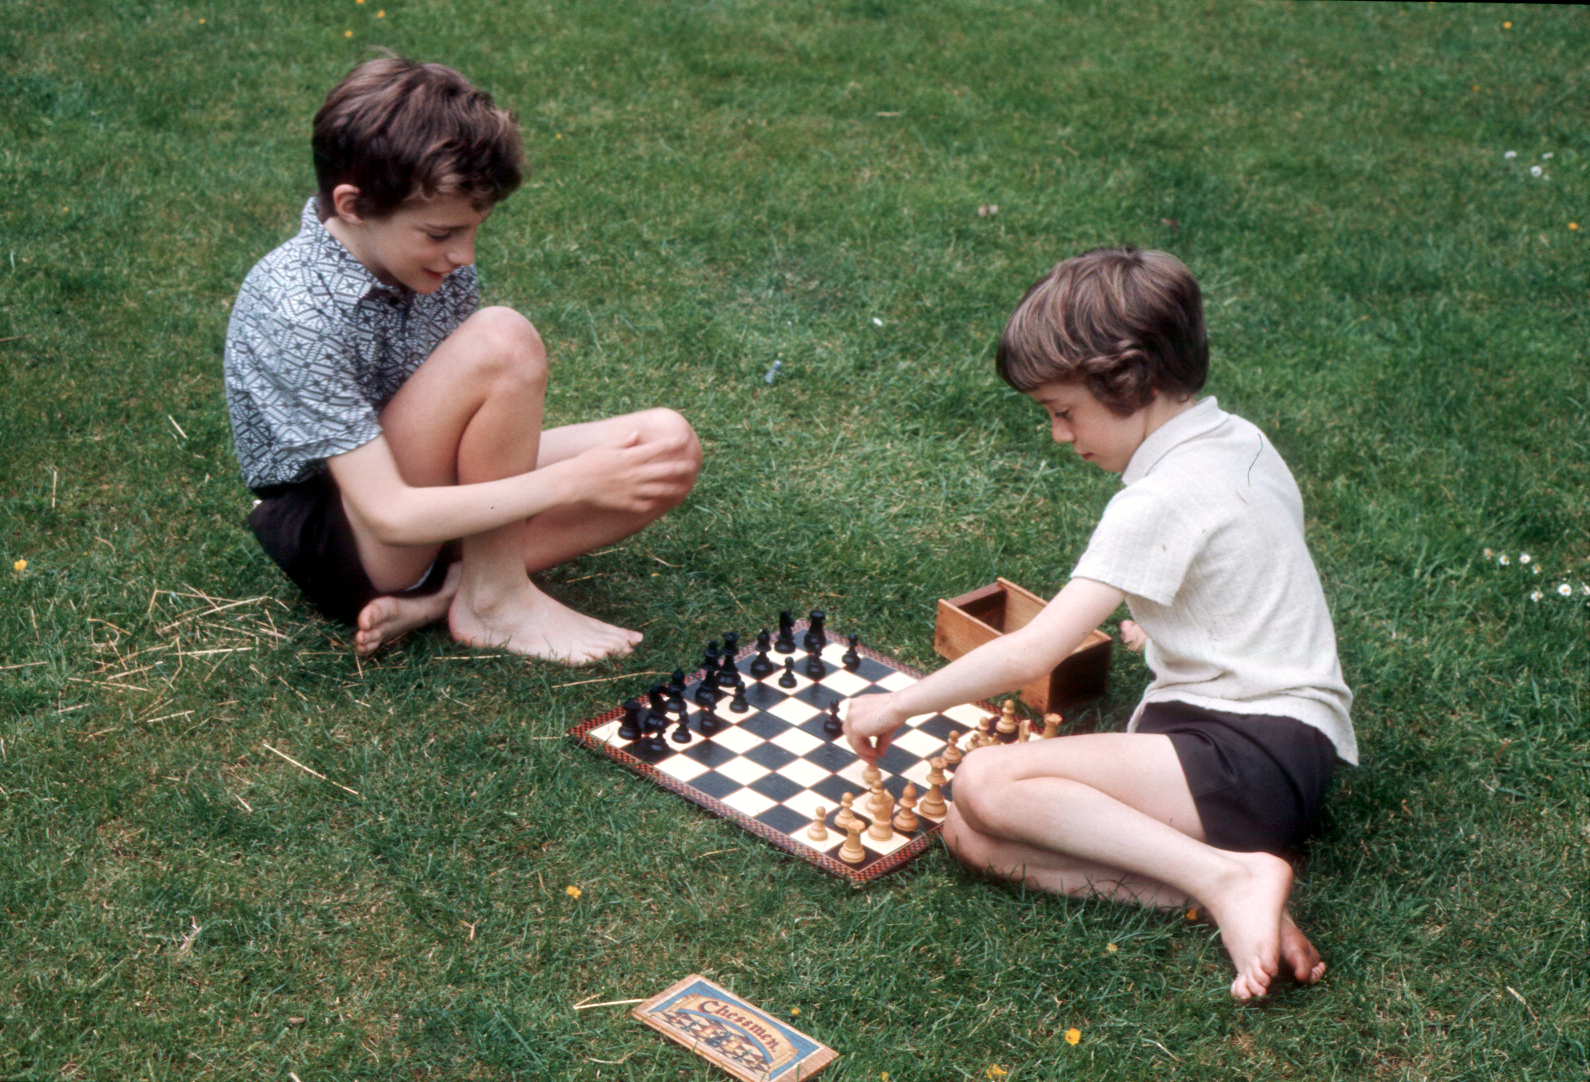 7303620k May 1973 - The boys playing chess in the garden at Croydon.